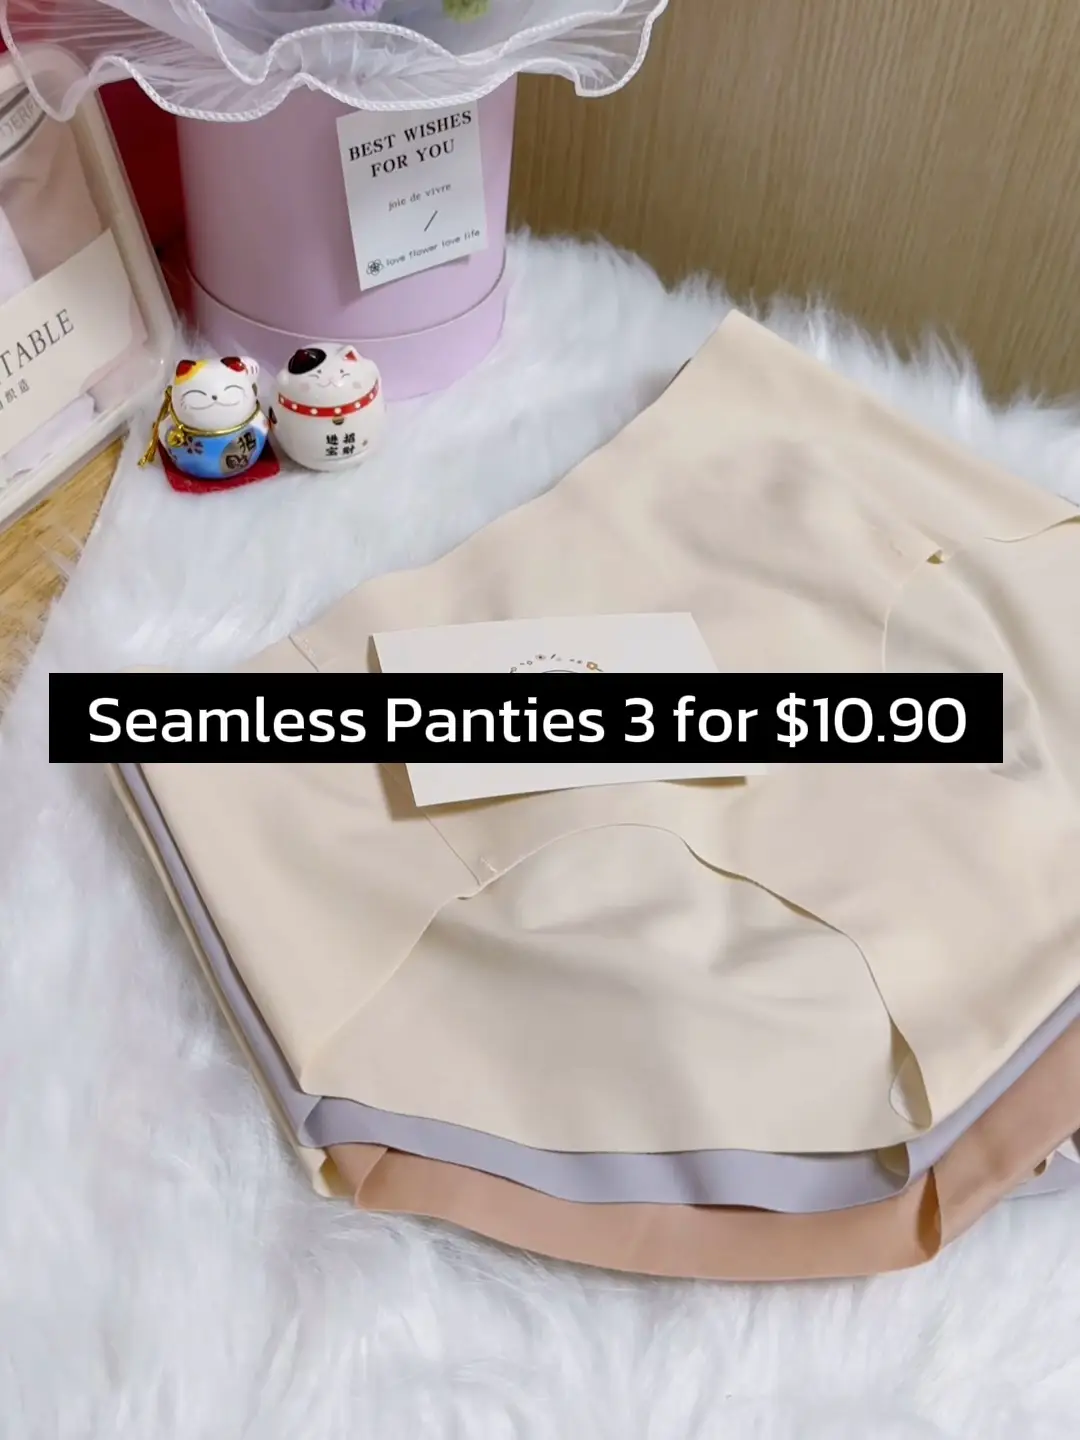 Budget Queen: Seamless undies for only $1 😂